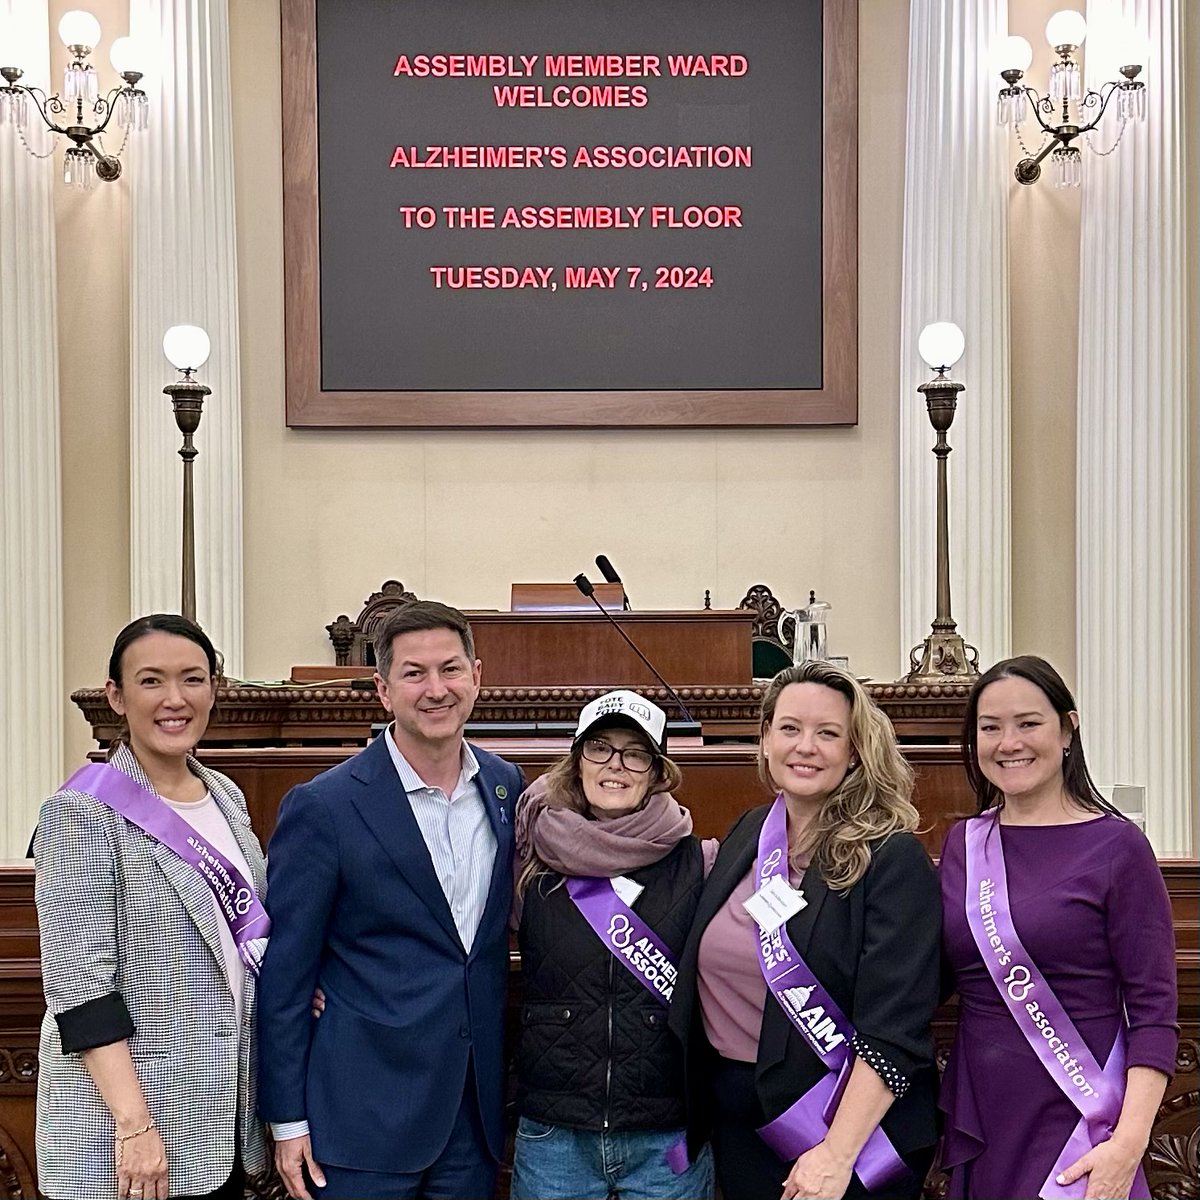 Thank you for meeting with us @californiaalz advocates today. We are making huge strides in the fight to #ENDALZ. With your help @AsmChrisWard, we hope #CAleg will pass #SB639, #AB2680, #AB 2689 to improve #Care4Alz this year!